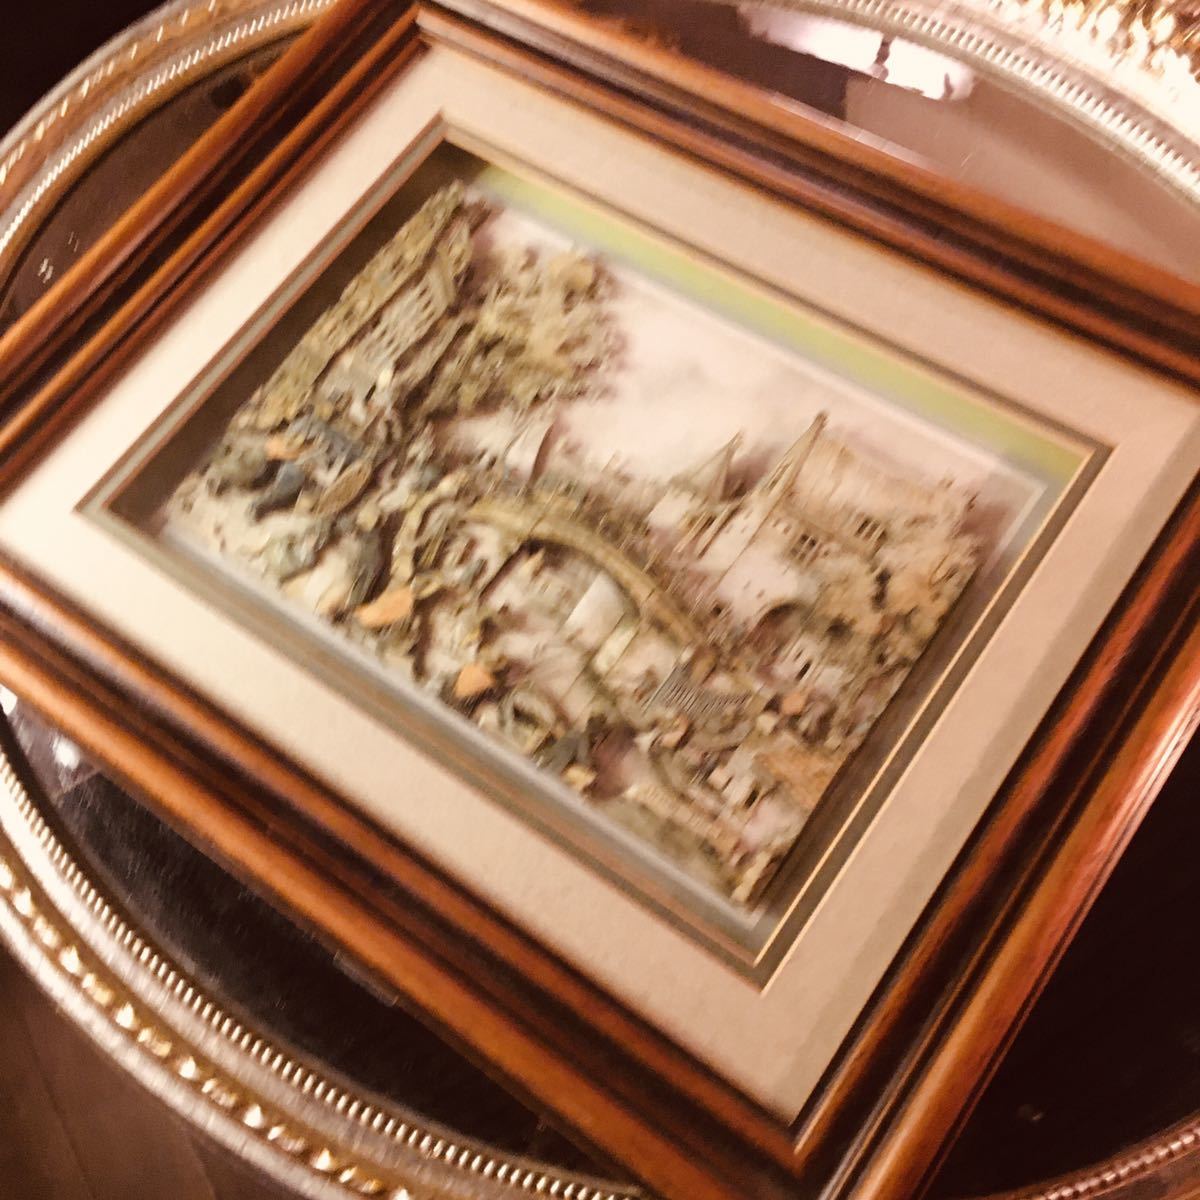  hot water cloth . antique Britain England Vintage wall decoupage wooden picture frame size H 29W 36D